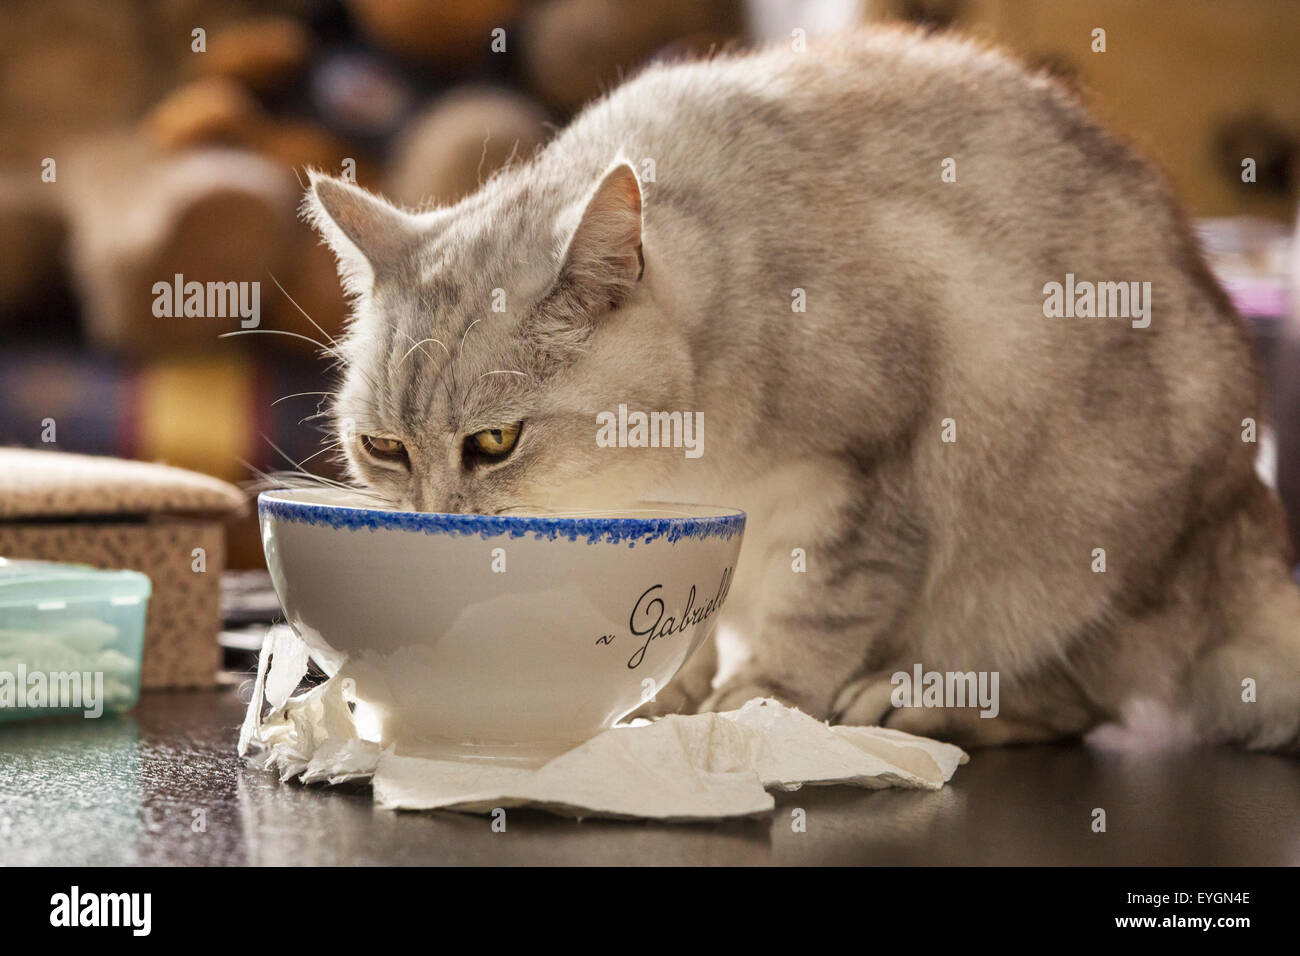 British shorthair cat drinking milk from bowl at home Stock Photo